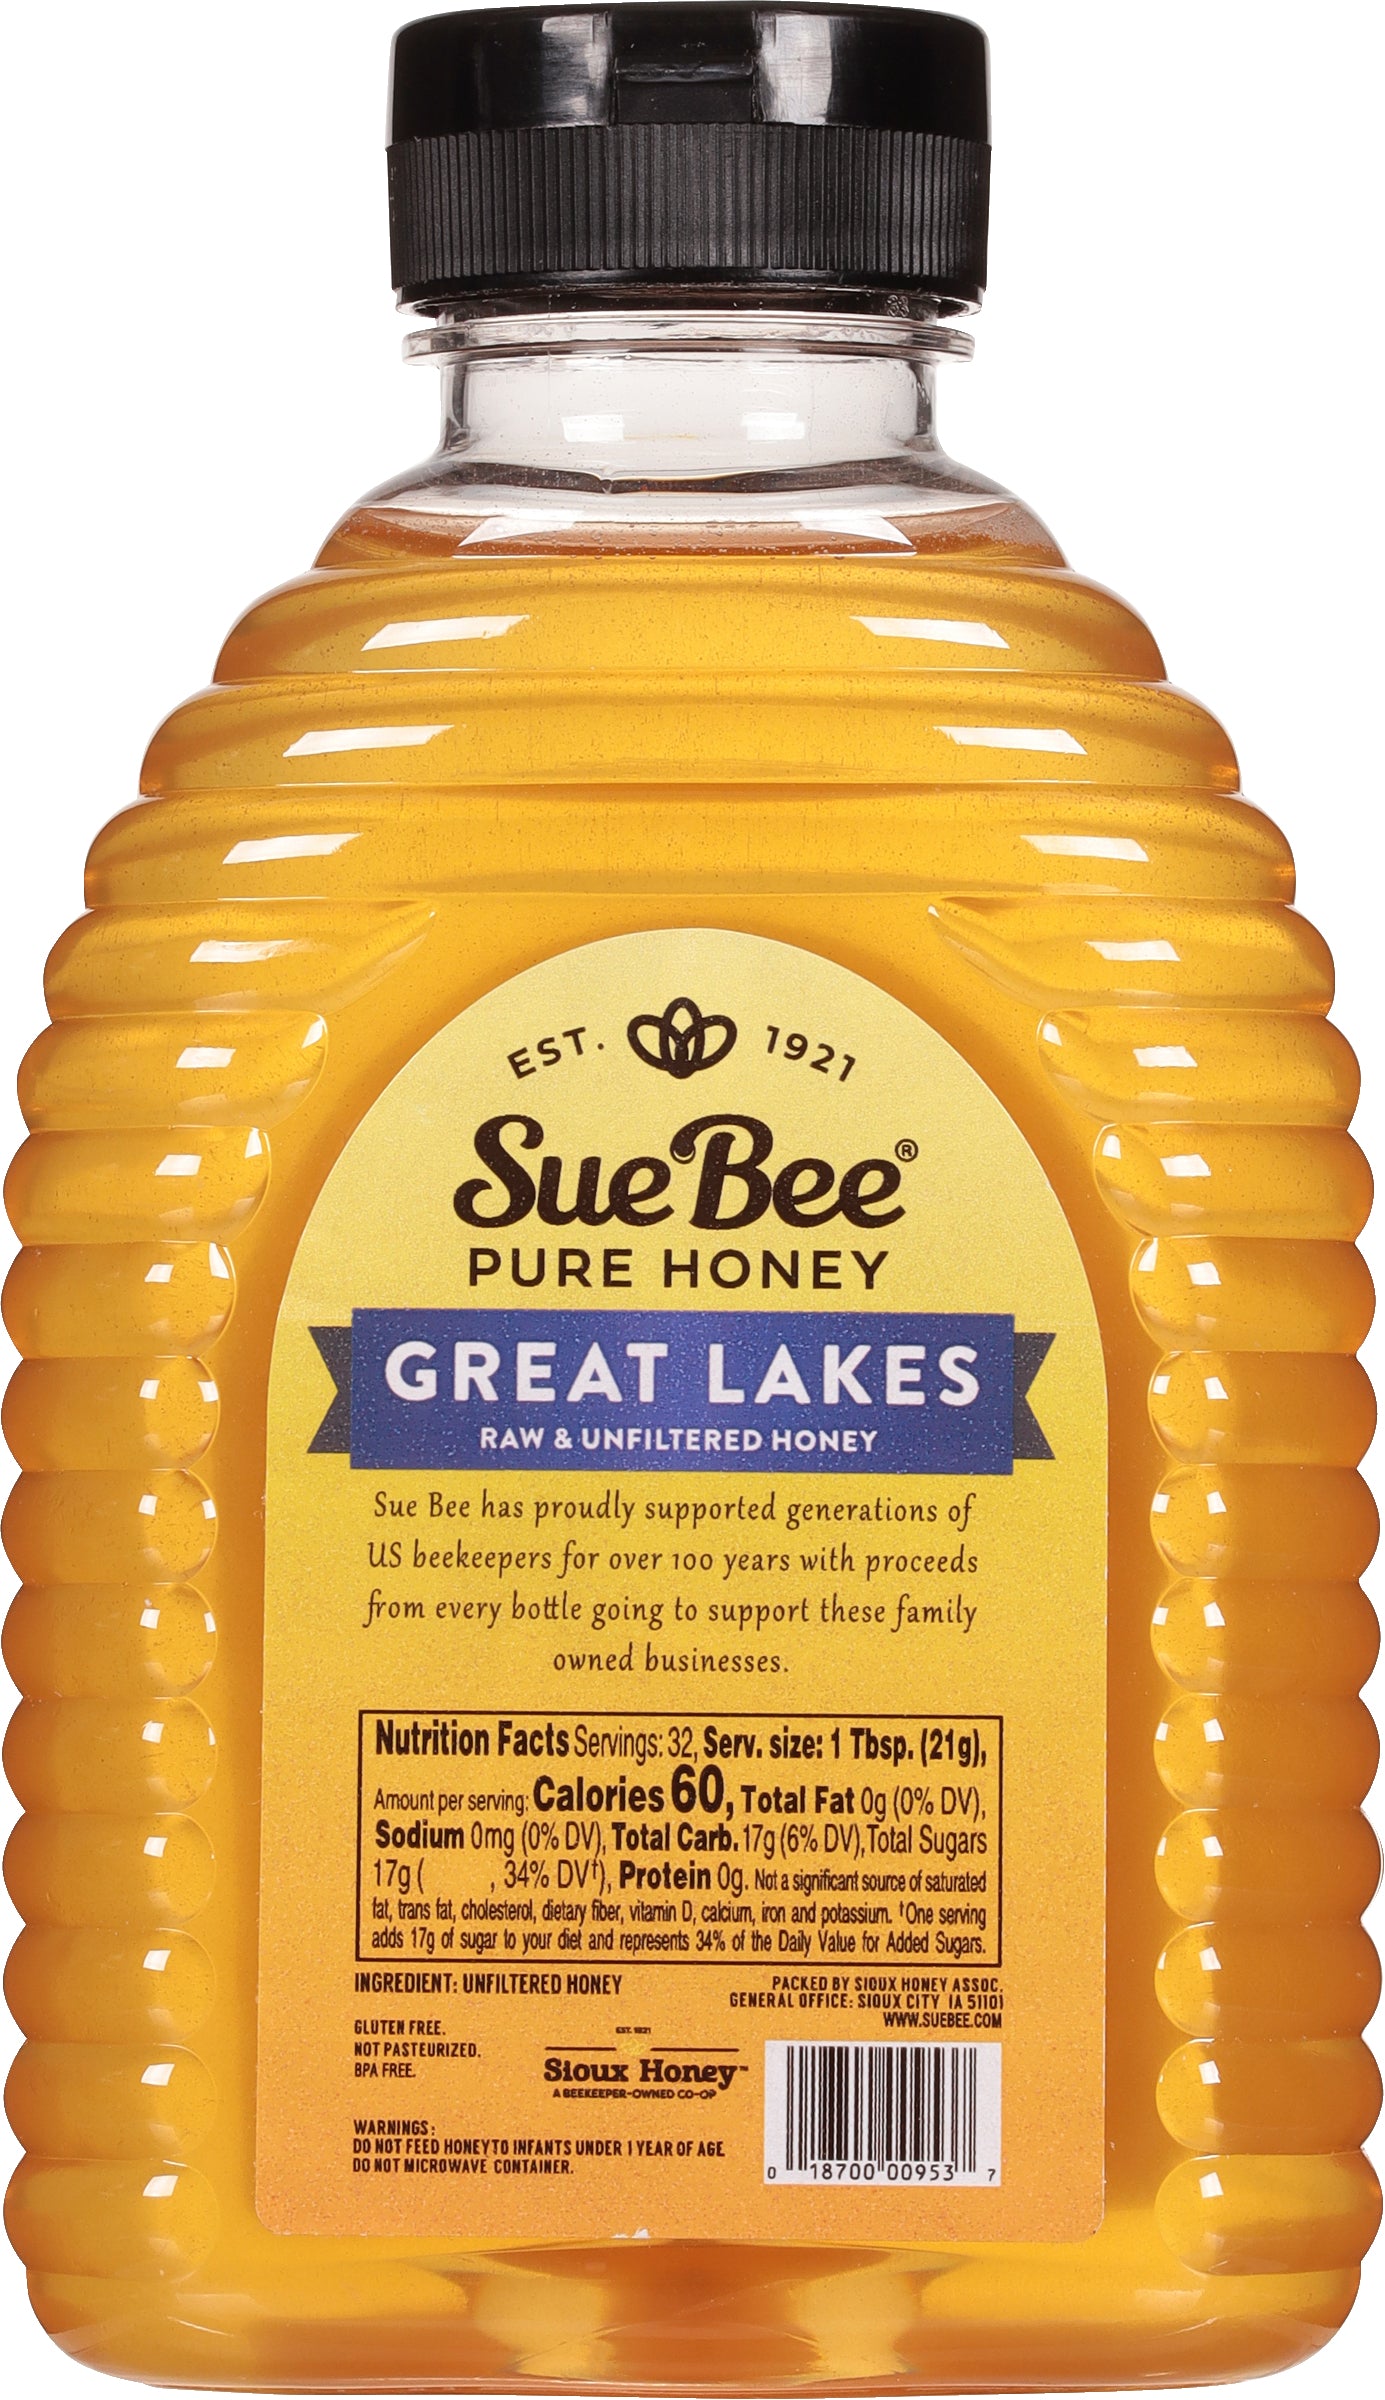 Sue Bee Honey Regional Great Lakes USA Honey, Strained, Unfiltered Beekeeper-Owned Co-op Honey, 24-Ounce